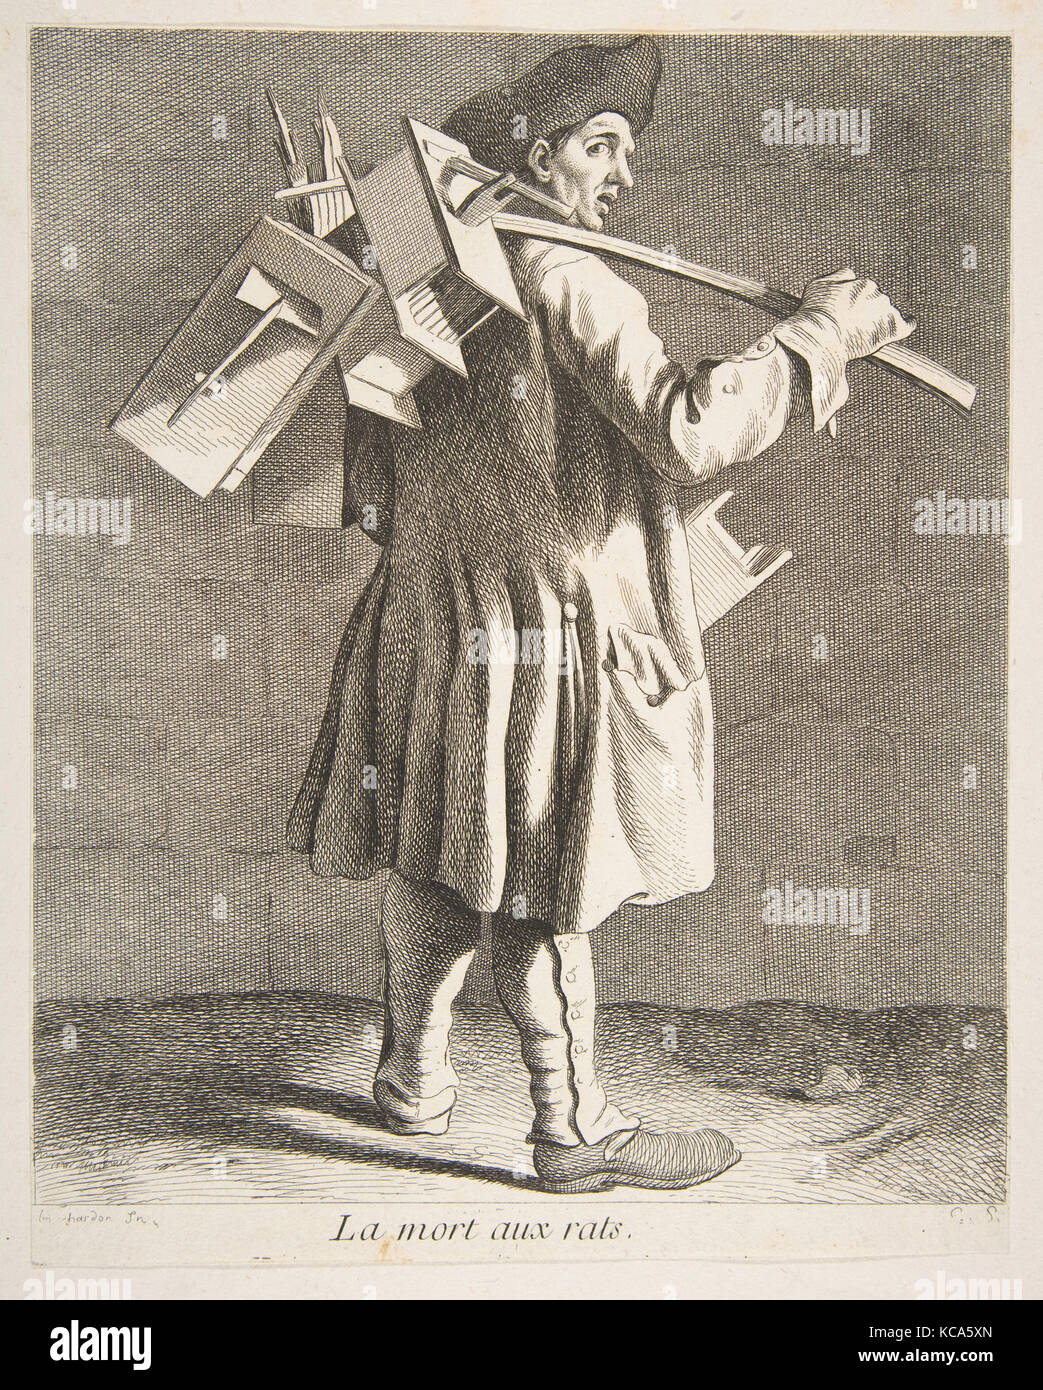 Historical Artwork Of A 17th Century Rat-catcher Wood Print by